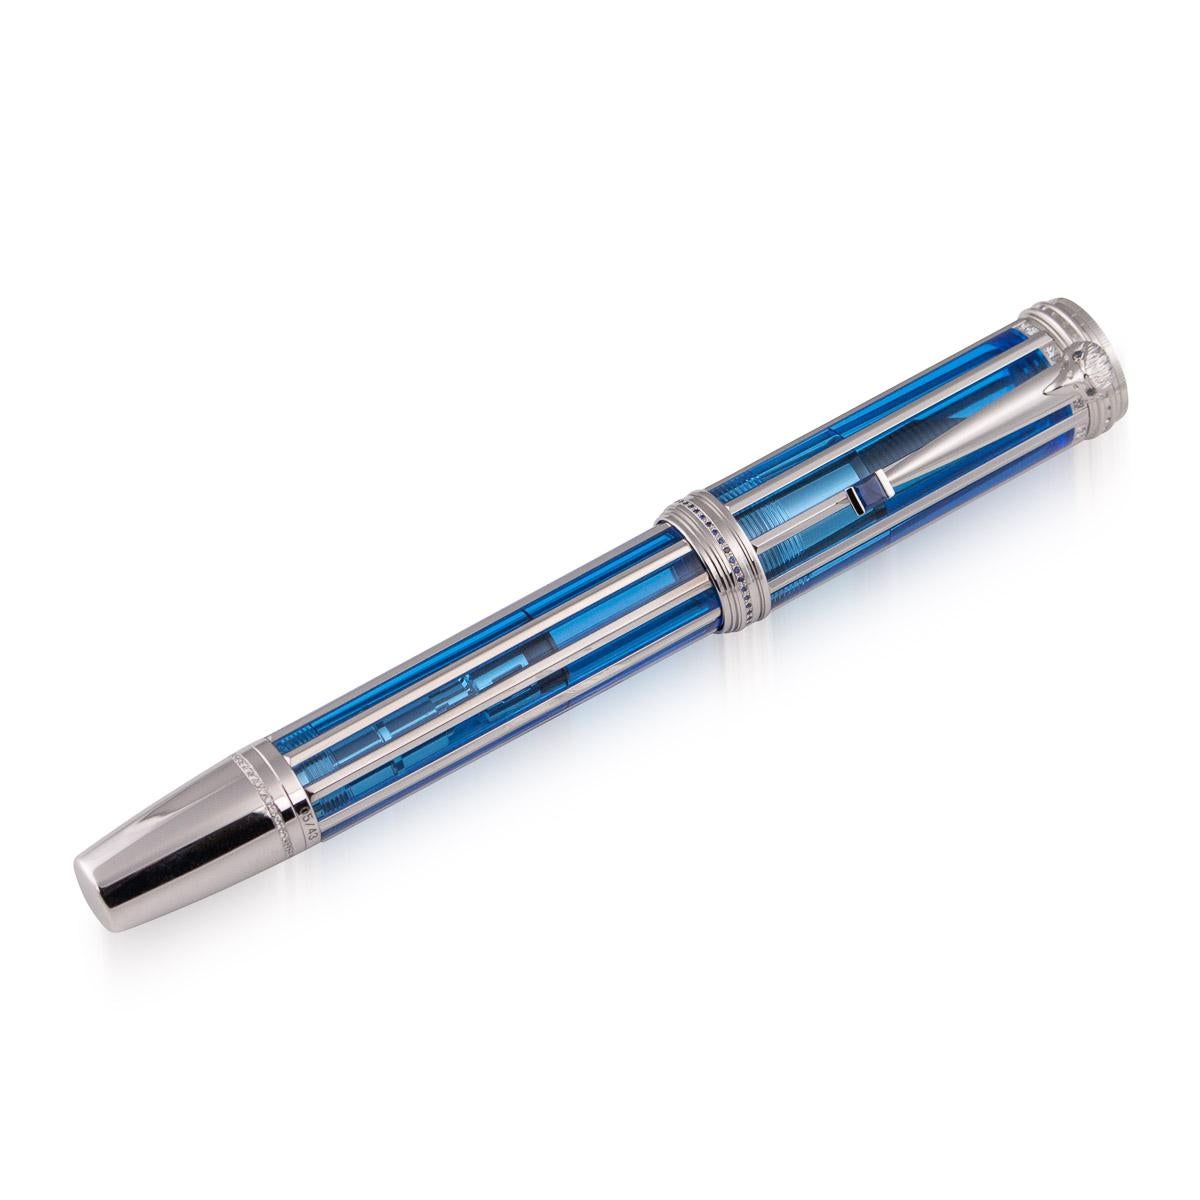 Montblanc very rare Limited Edition 5/43 White House Fountain pen. The 18k white gold pen designed in the style of the White House architecture, accented by circular-cut diamond vertical bands along the blue resin barrel, the cap ring with diamond